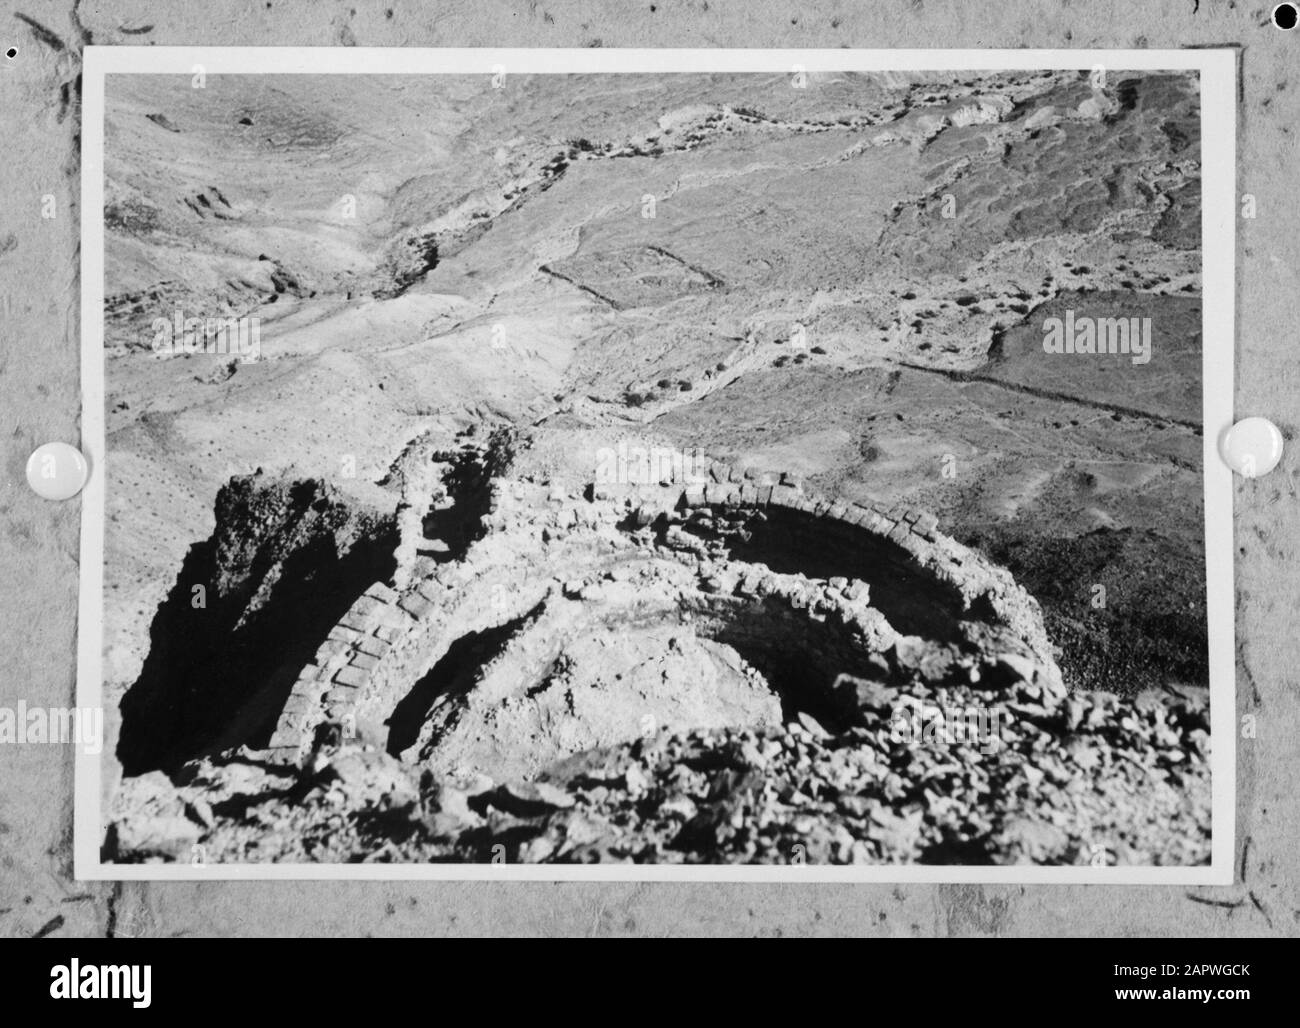 Israel 1964-1965: Dead Sea Area  Massada. Look at the excavations at the site of the Roman army camp Annotation: Massada is a citadel on a rock near the Dead Sea. It is known for the resistance of fled Jews to the Roman occupation after 70 AD Date: 1964 Location: Dead Sea, Israel, Massada Keywords: archeology, sieges, history, excavations, ruins Stock Photo